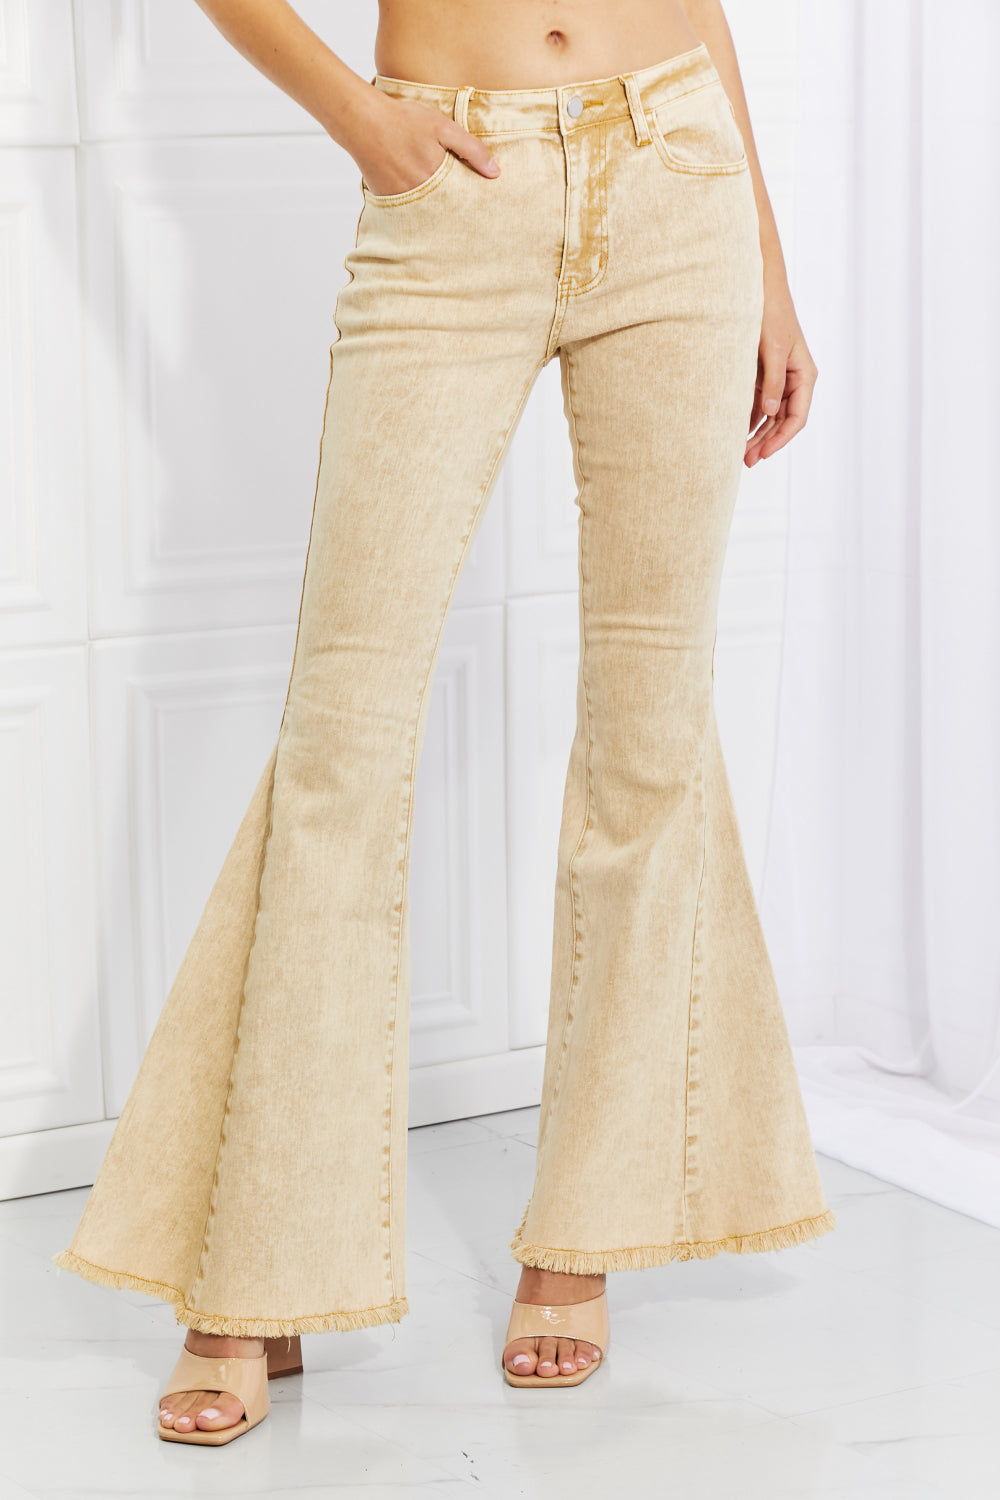 PASTEL YELLOW - Color Theory Flip Side Fray Hem Bell Bottom Jeans in Yellow - Ships from The US - womens jeans at TFC&H Co.